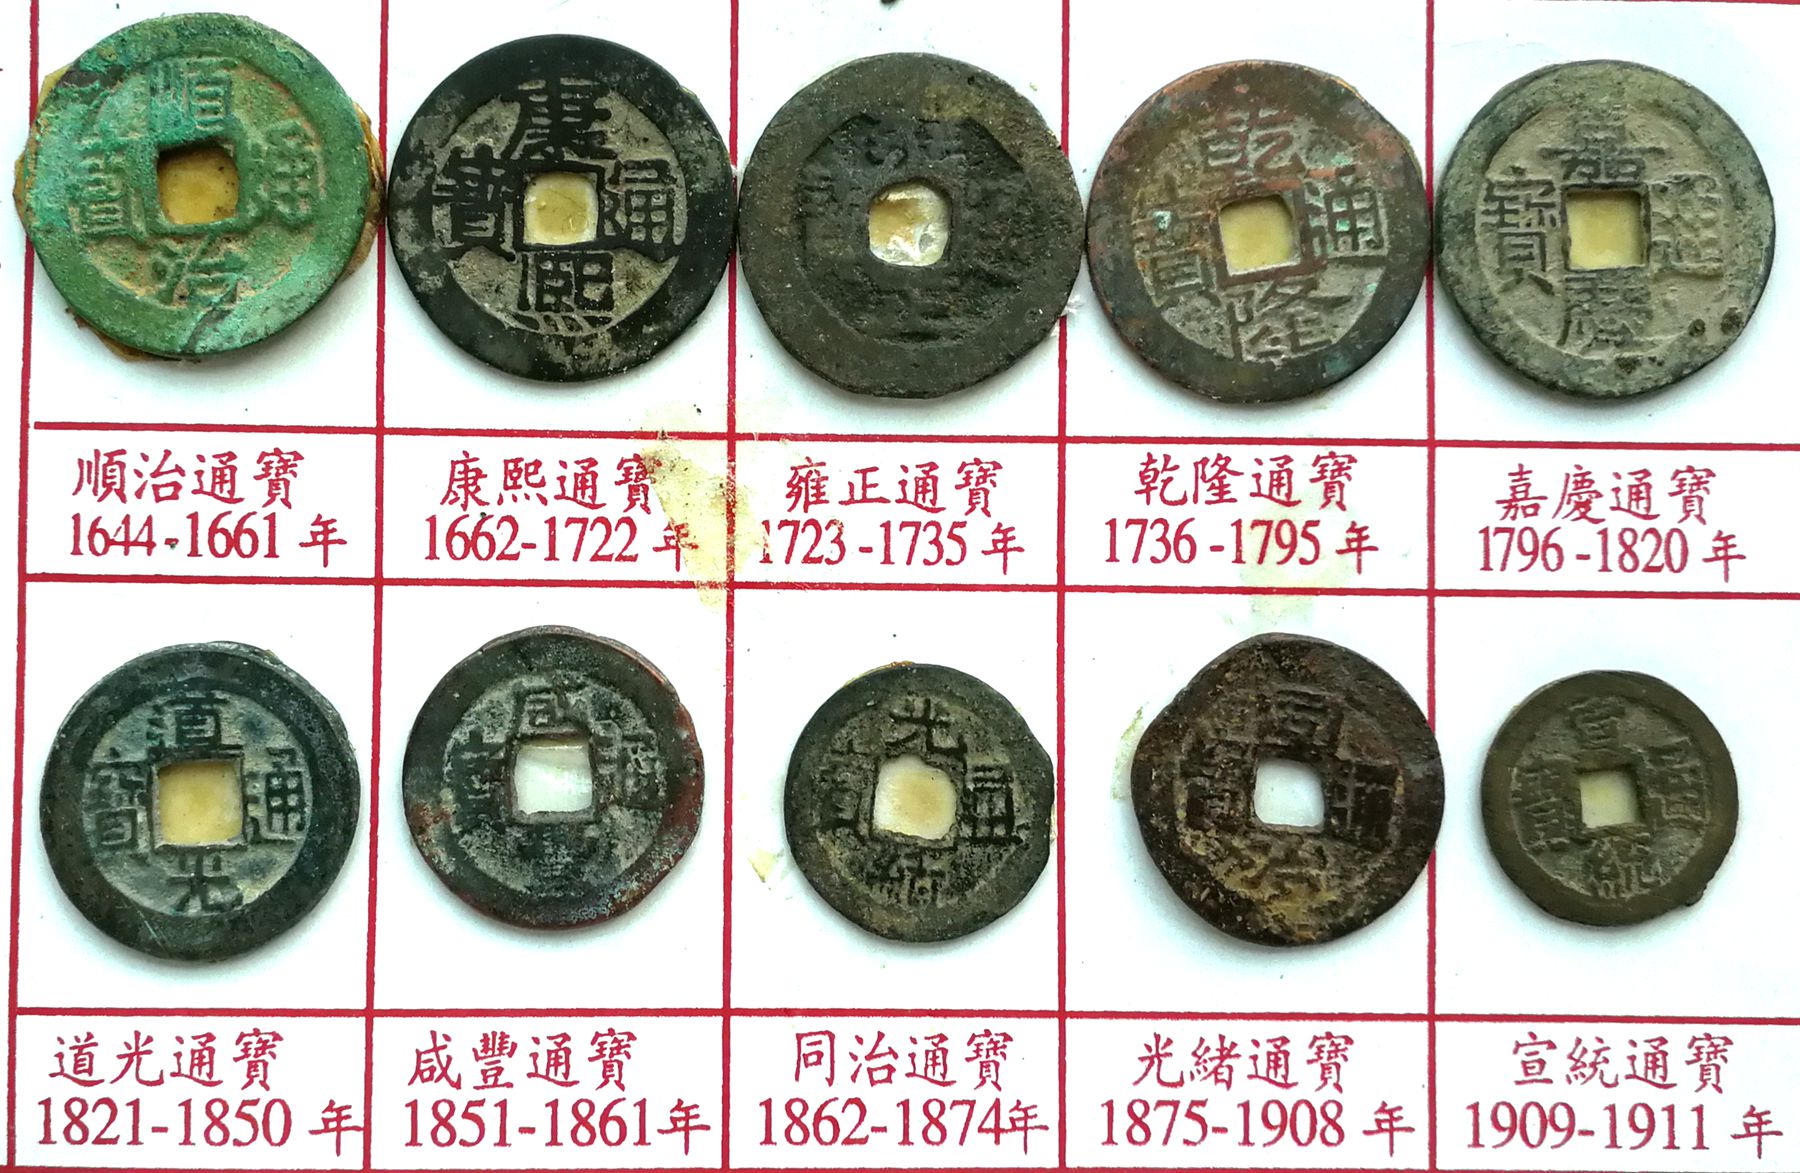 K4200, Set of China Qing Dynasty 10 diff. coins, 10 diff. emperors, Fine Conditon